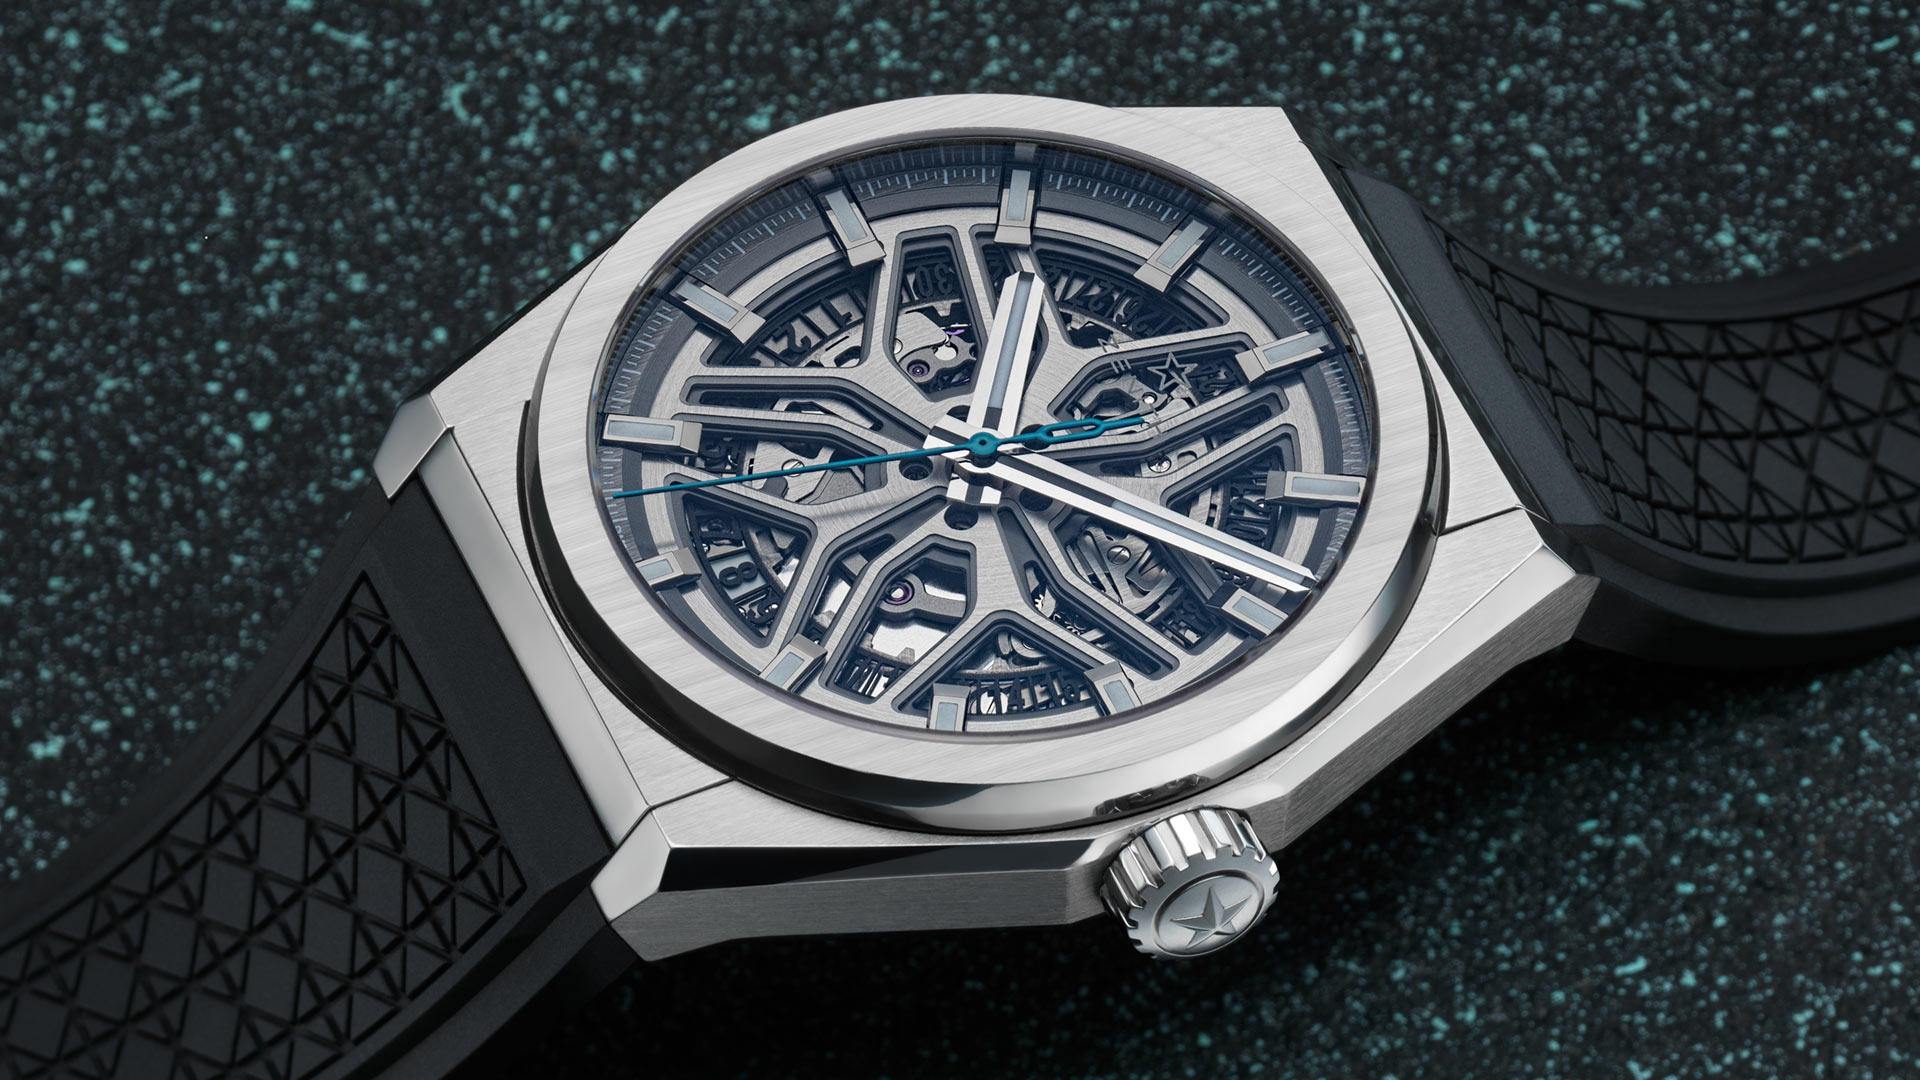 Zenith Defy Classic Range Rover Special Edition Watch